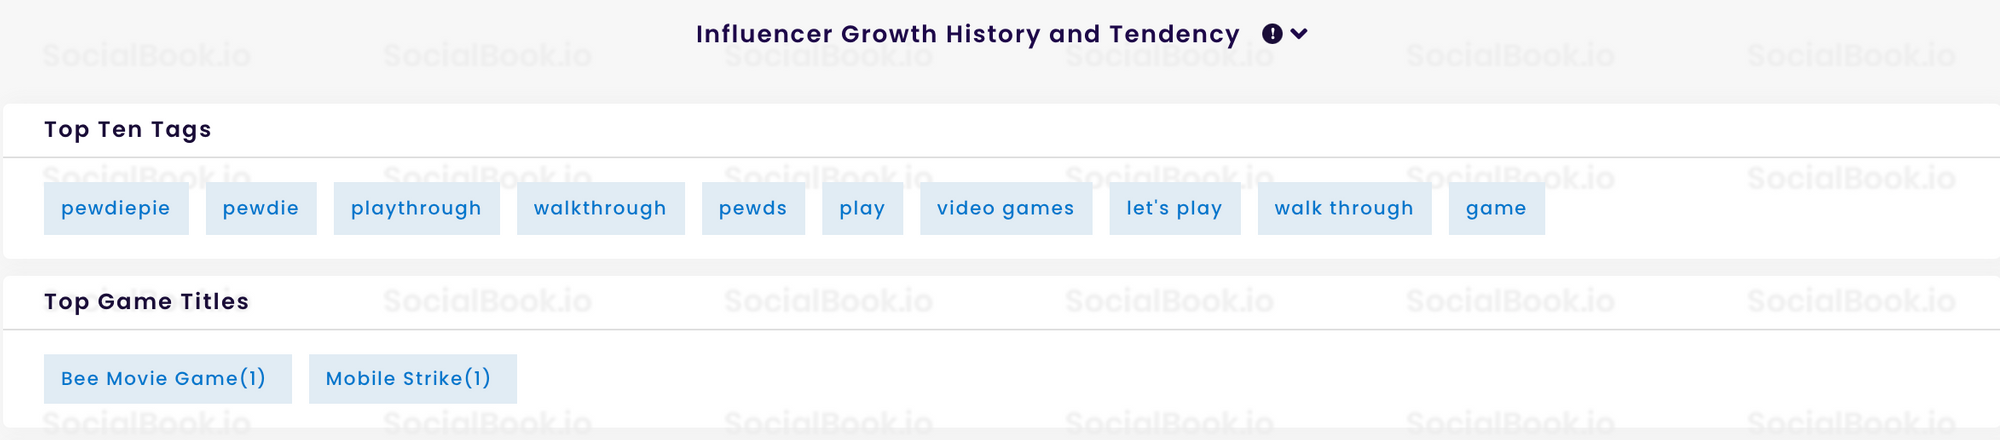 Influencer Growth History and Tendency